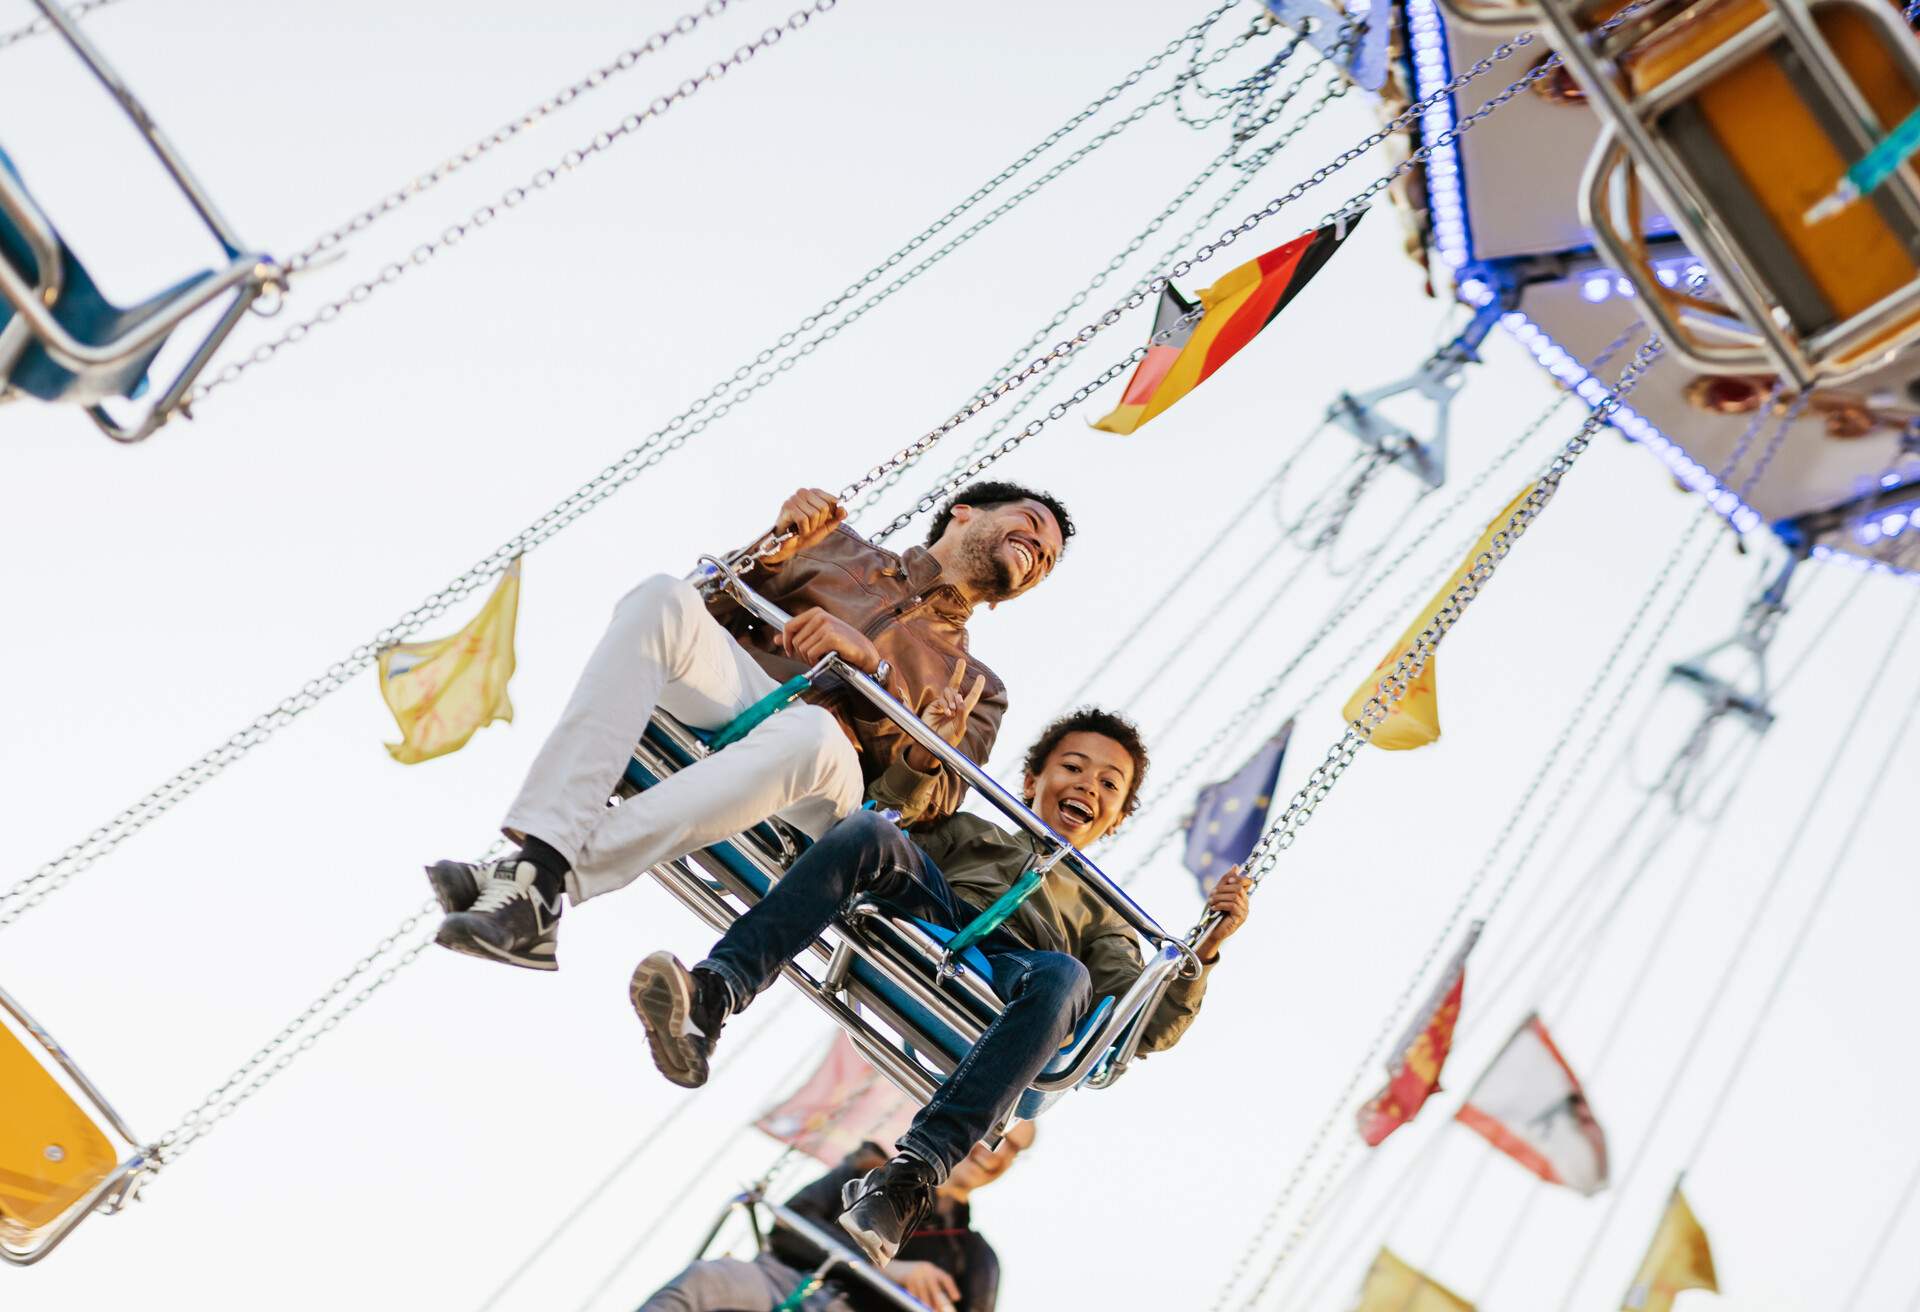 A happy father and son enjoying the large swing ride at the fun fair, creating cherished memories during their delightful day of amusement and joy.